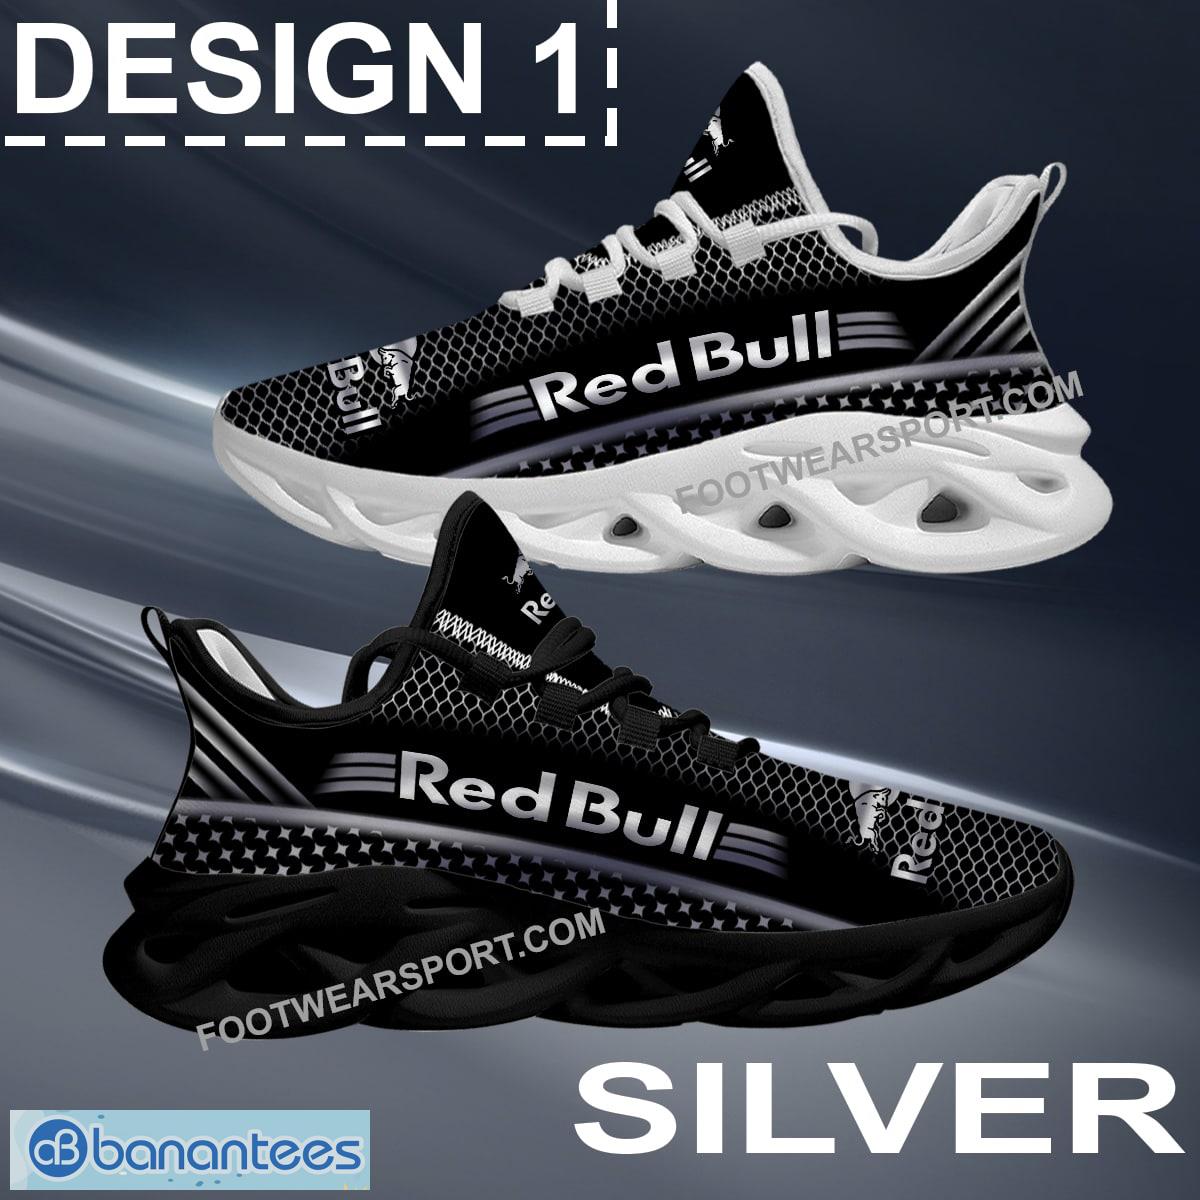 Red Bull Max Soul Shoes Gold, Diamond, Silver All Over Print Recognition Running Sneaker Gift - Brand Red Bull Max Soul Shoes Style 1